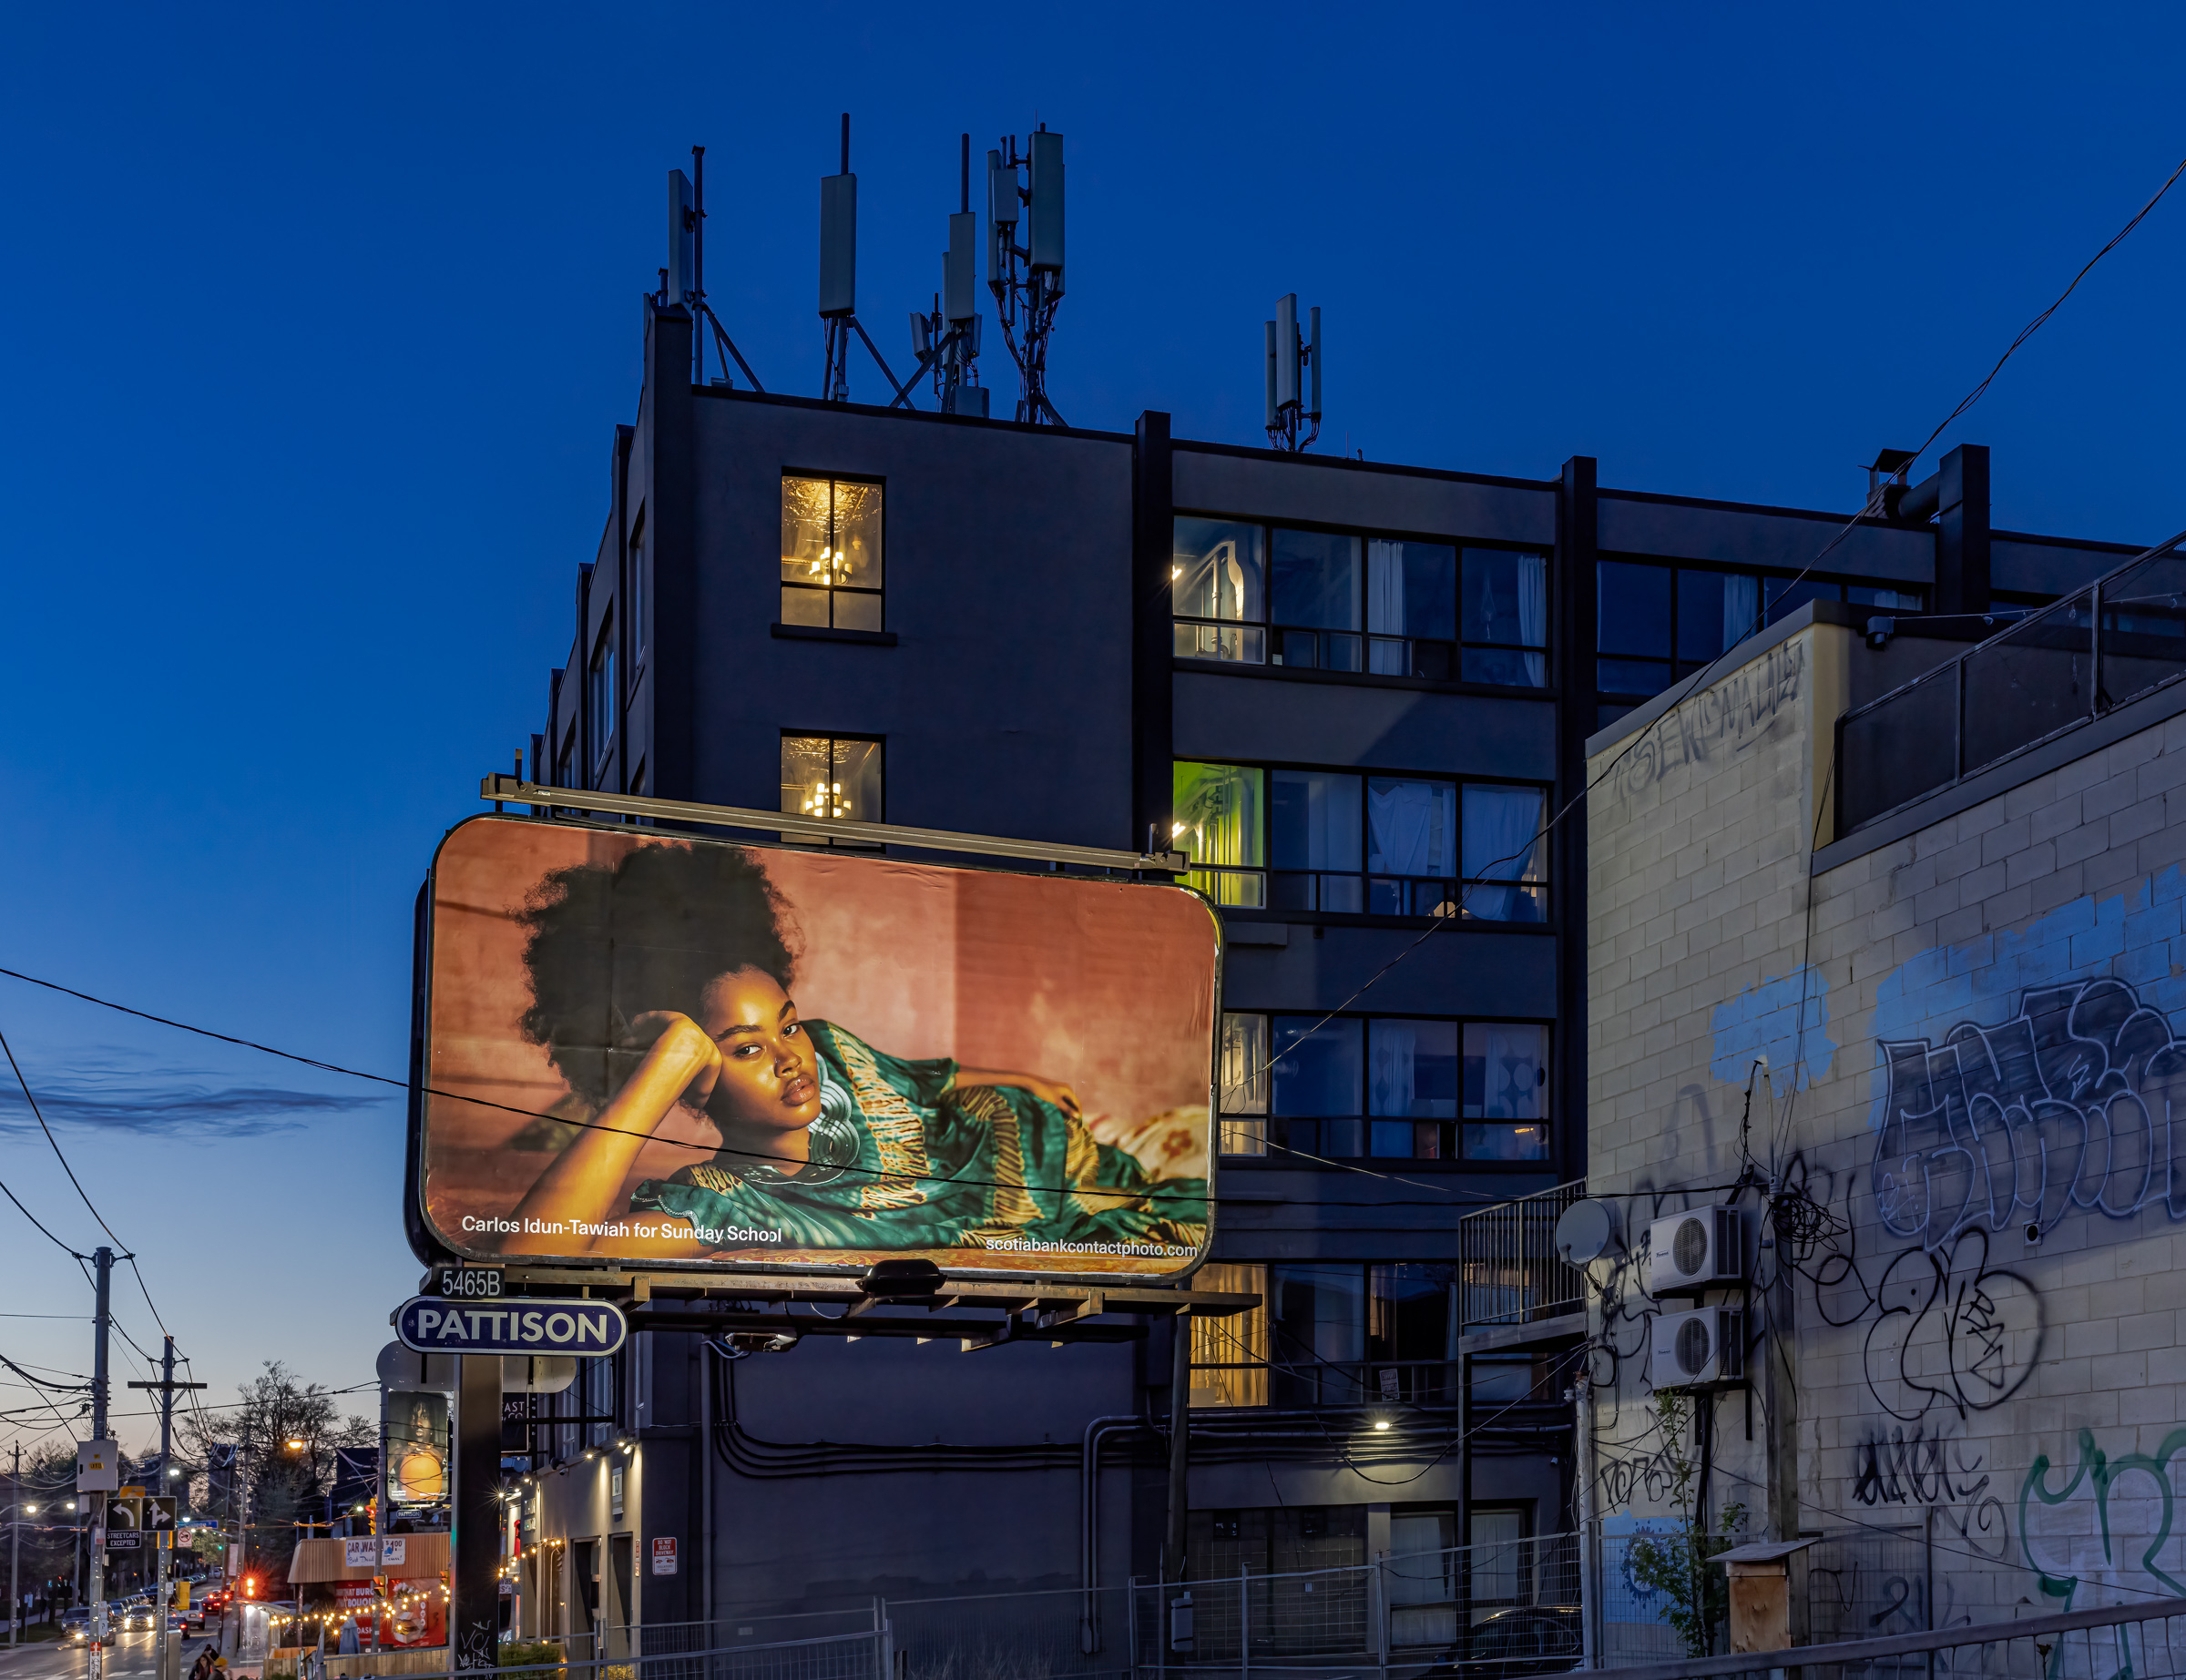     Sunday School, Feels Like HOME, 2023, installation view, billboards at Lansdowne Ave at Dundas St W and at College St, Toronto. Courtesy of the artists and Scotiabank CONTACT Photography Festival. Photo: Toni Hafkenscheid

